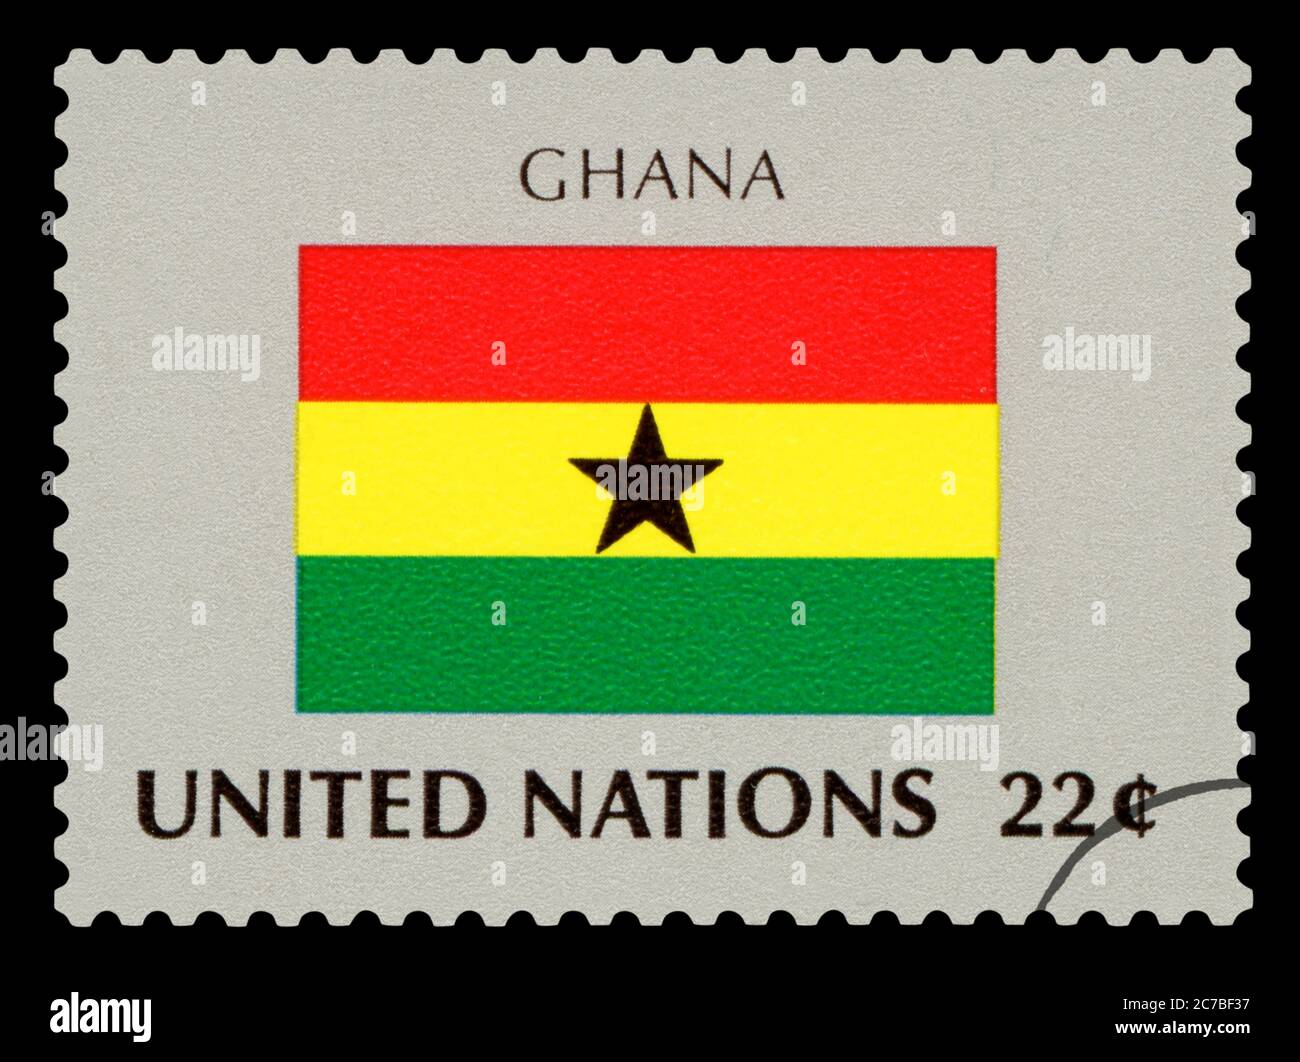 GHANA - Postage Stamp of Ghana national flag, Series of United Nations, circa 1984. Isolated on black background. Stock Photo